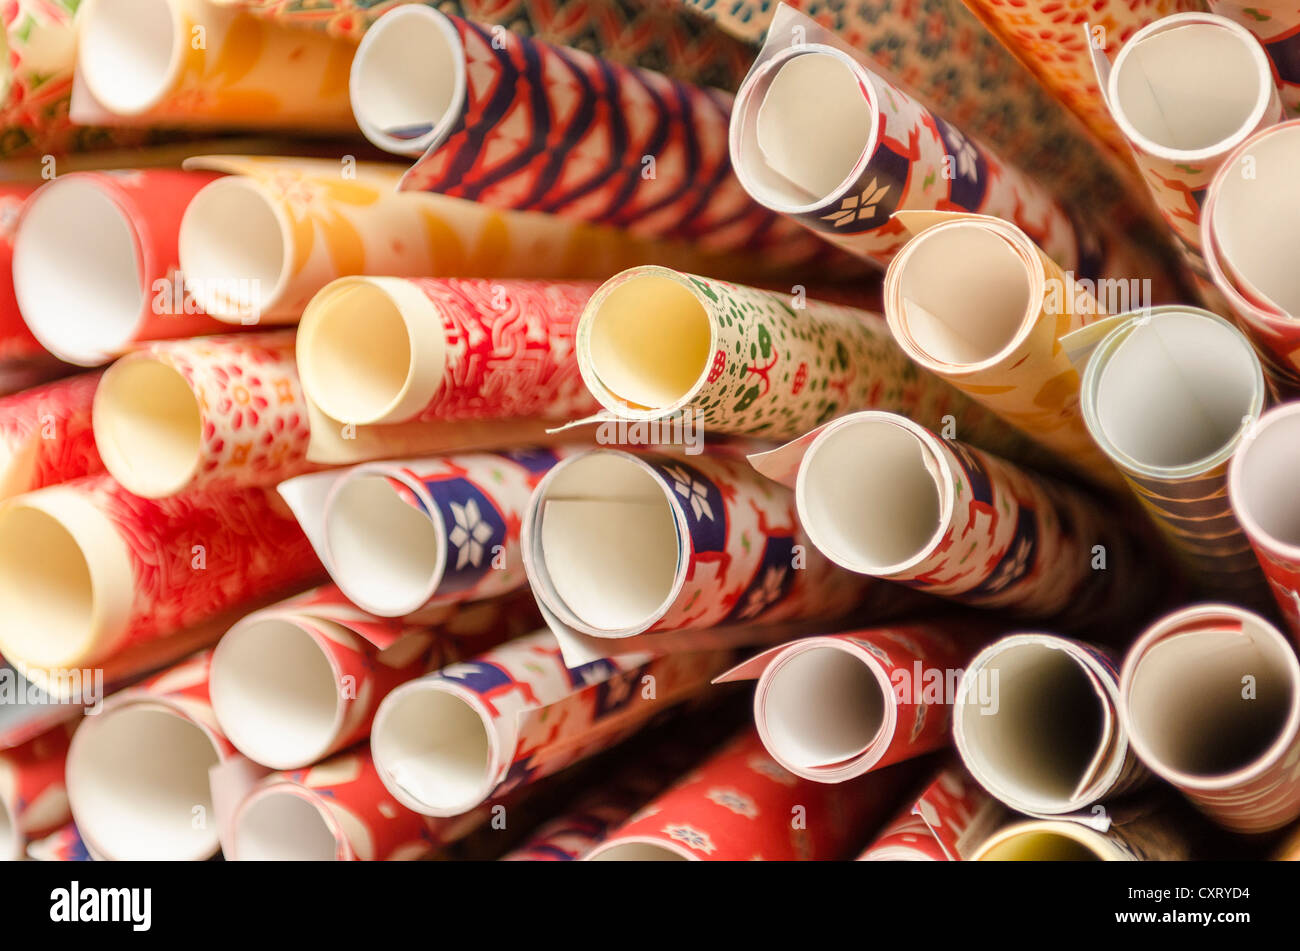 Wrapping paper, rolled and bundled Stock Photo